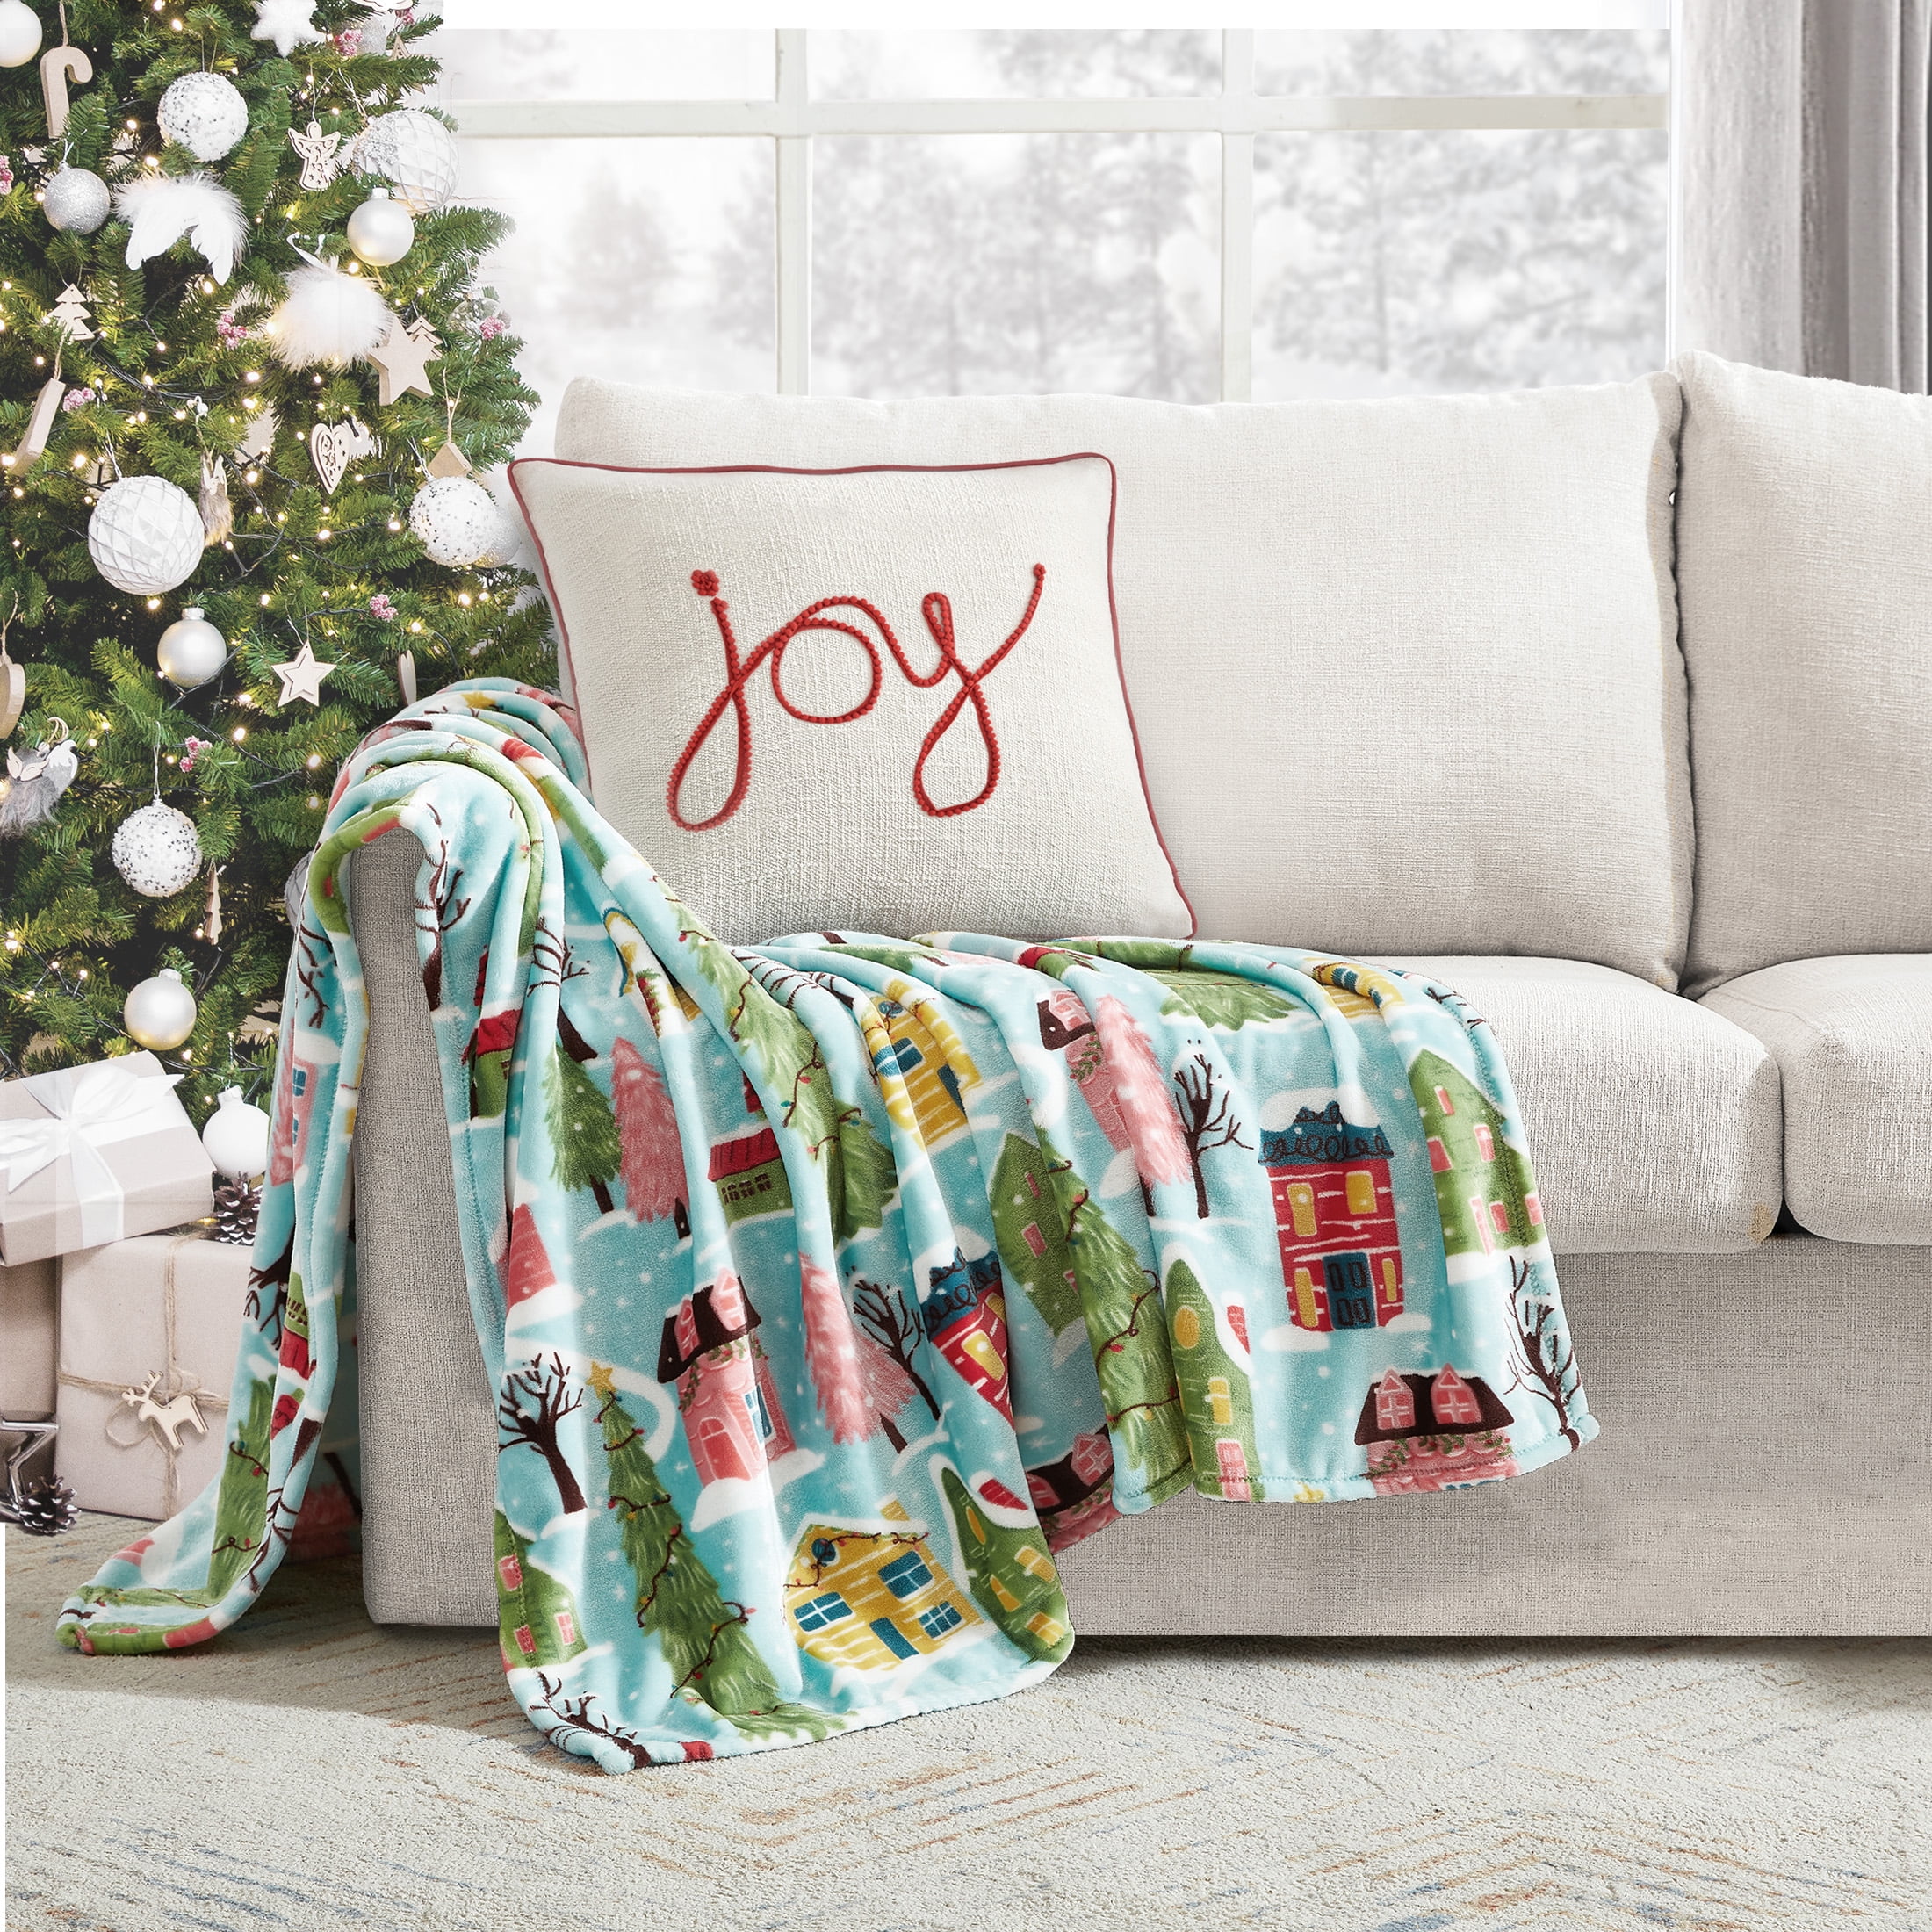 Holiday Time, Bright Holiday Houses Throw Blanket, Multi, 50" x 60", 1 Pack